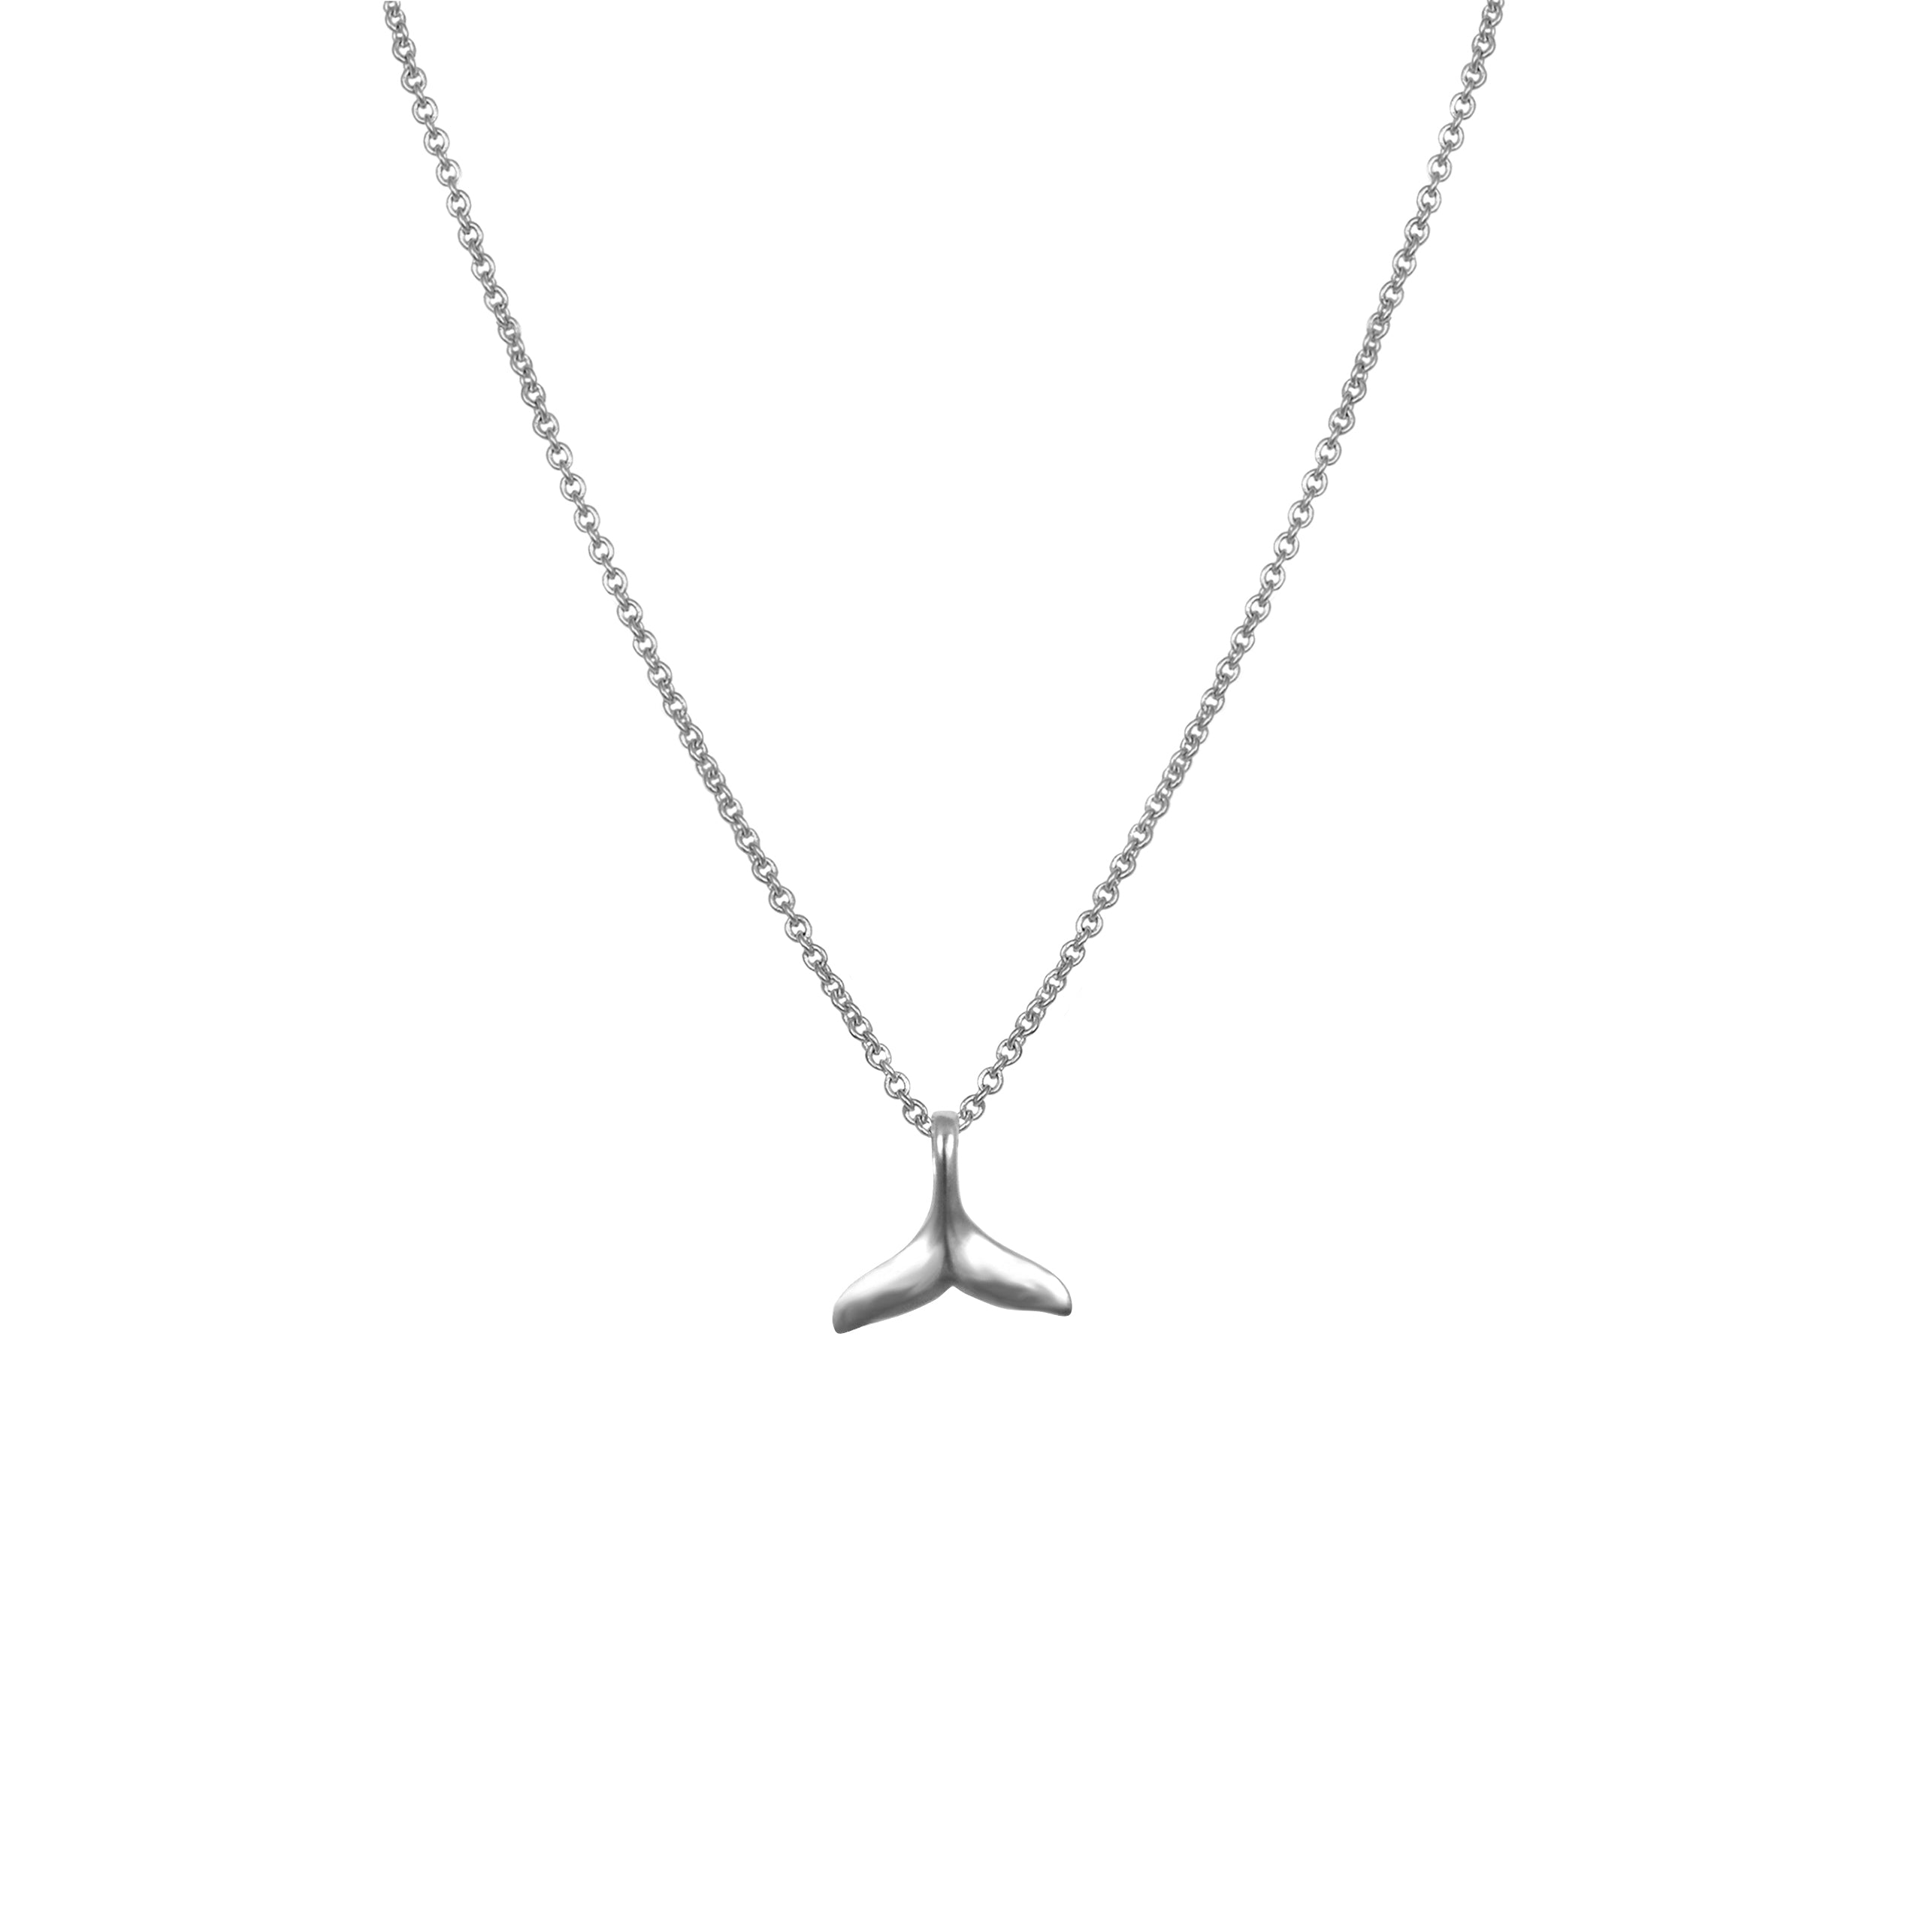 Silver whale tail pendant necklace